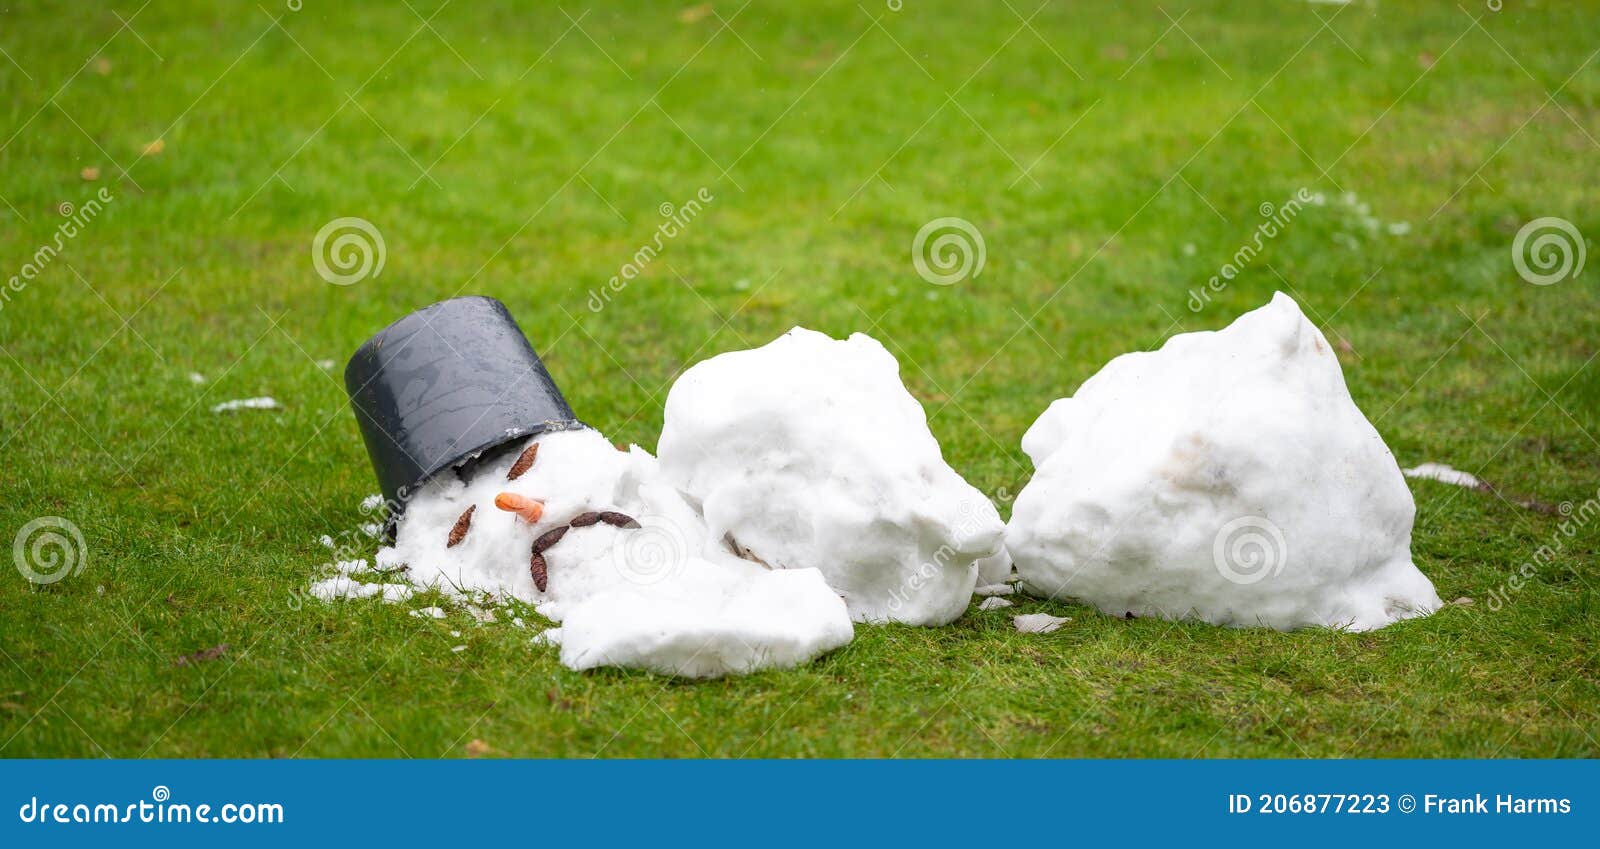 https://thumbs.dreamstime.com/z/melted-snow-man-sad-face-as-symbol-end-winter-melted-snow-man-sad-face-as-symbol-end-206877223.jpg